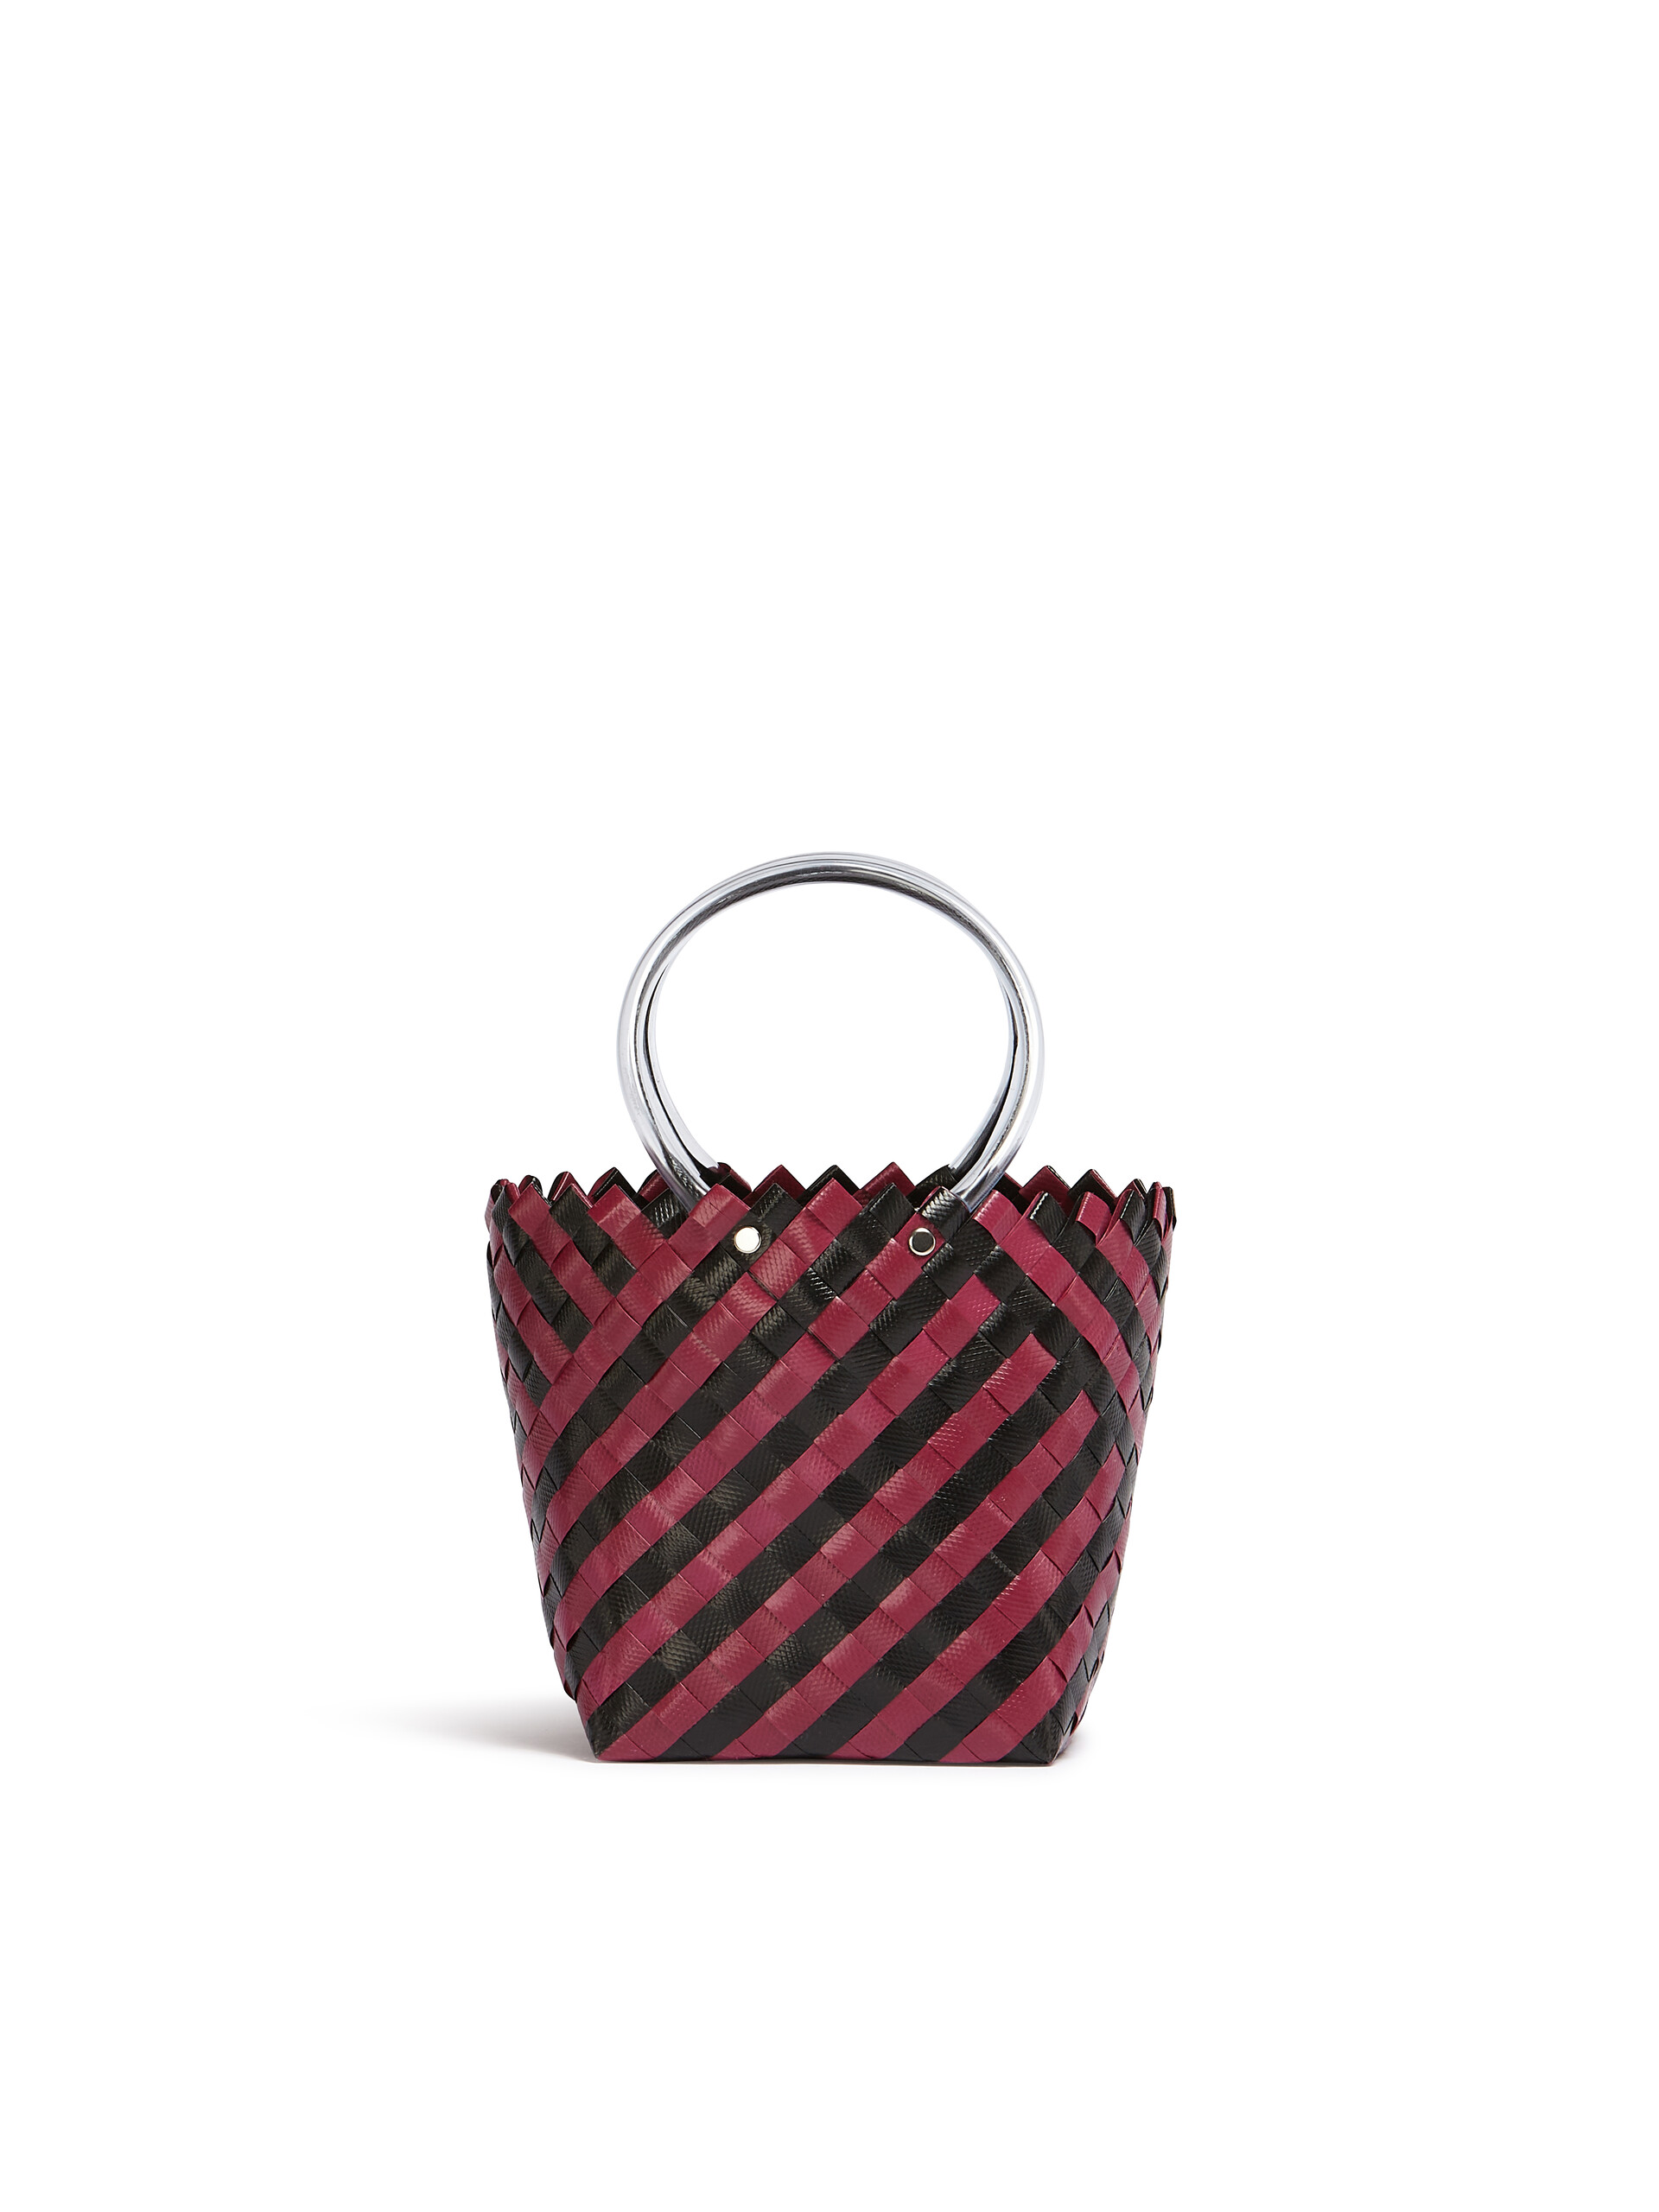 MARNI MARKET TAHA bag in black and burgundy woven material - Shopping Bags - Image 3